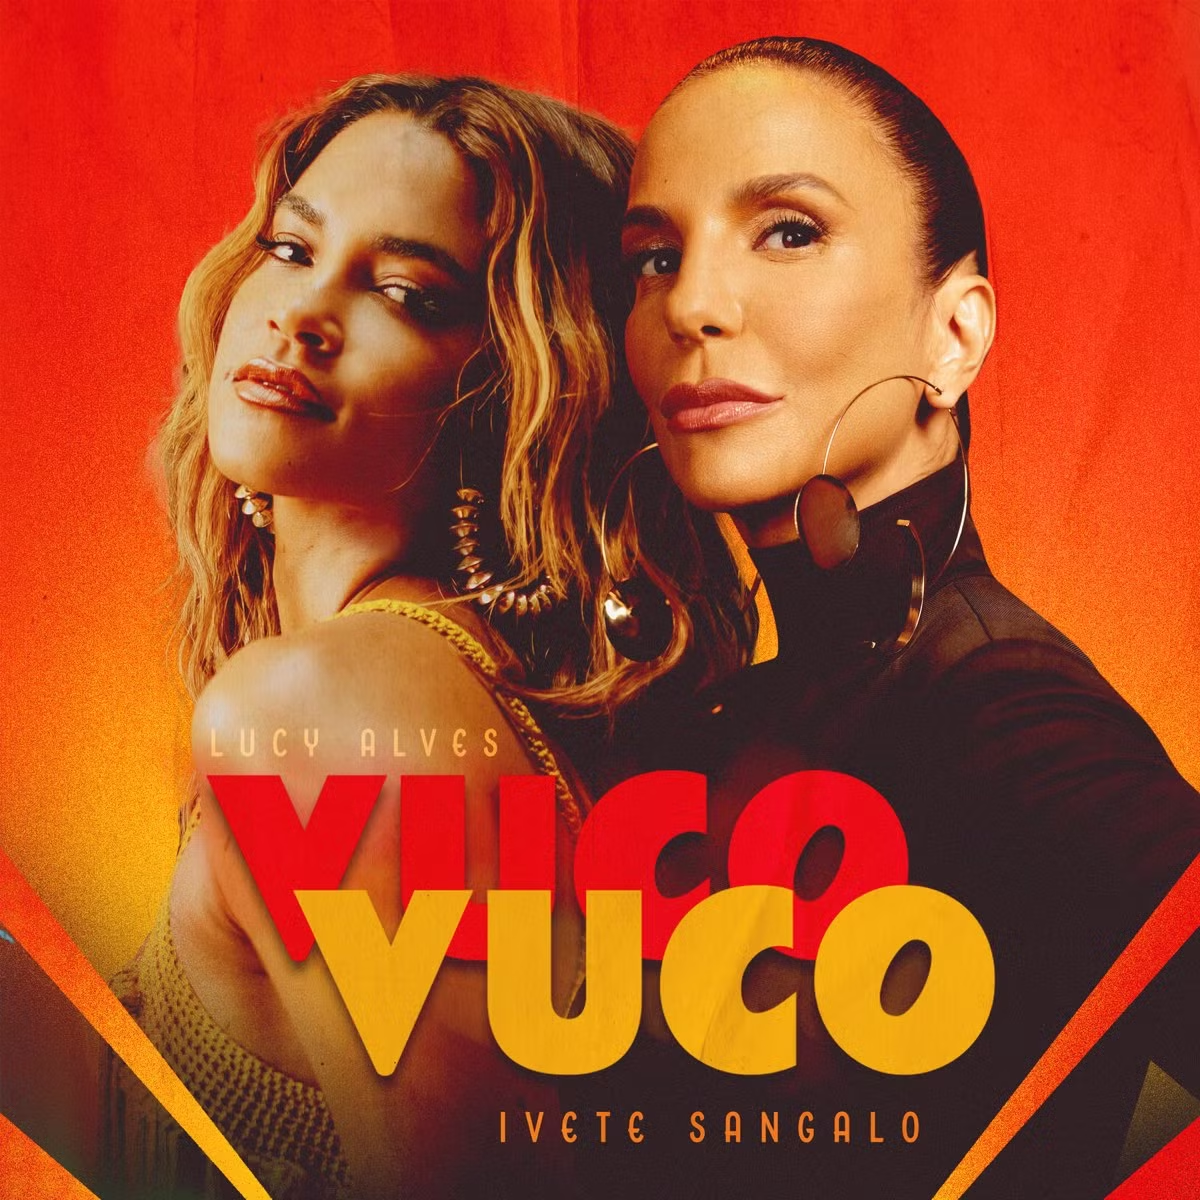 Lucy Alves & Ivete Sangalo Vuco Vuco cover artwork